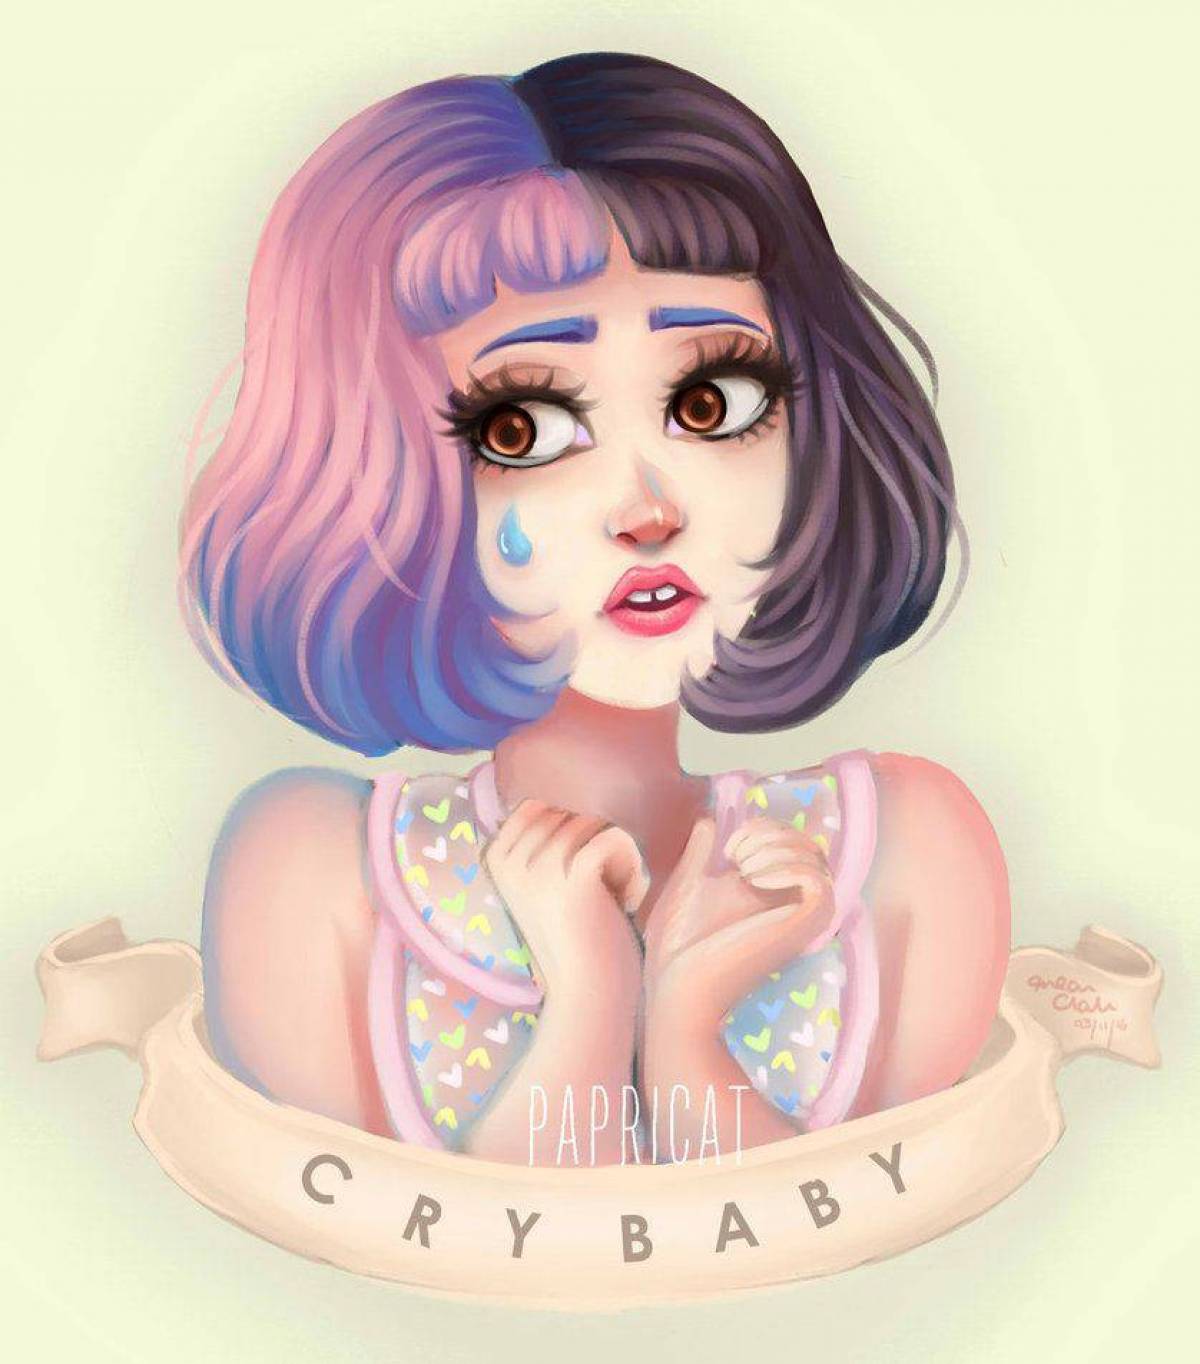 Crybaby #6